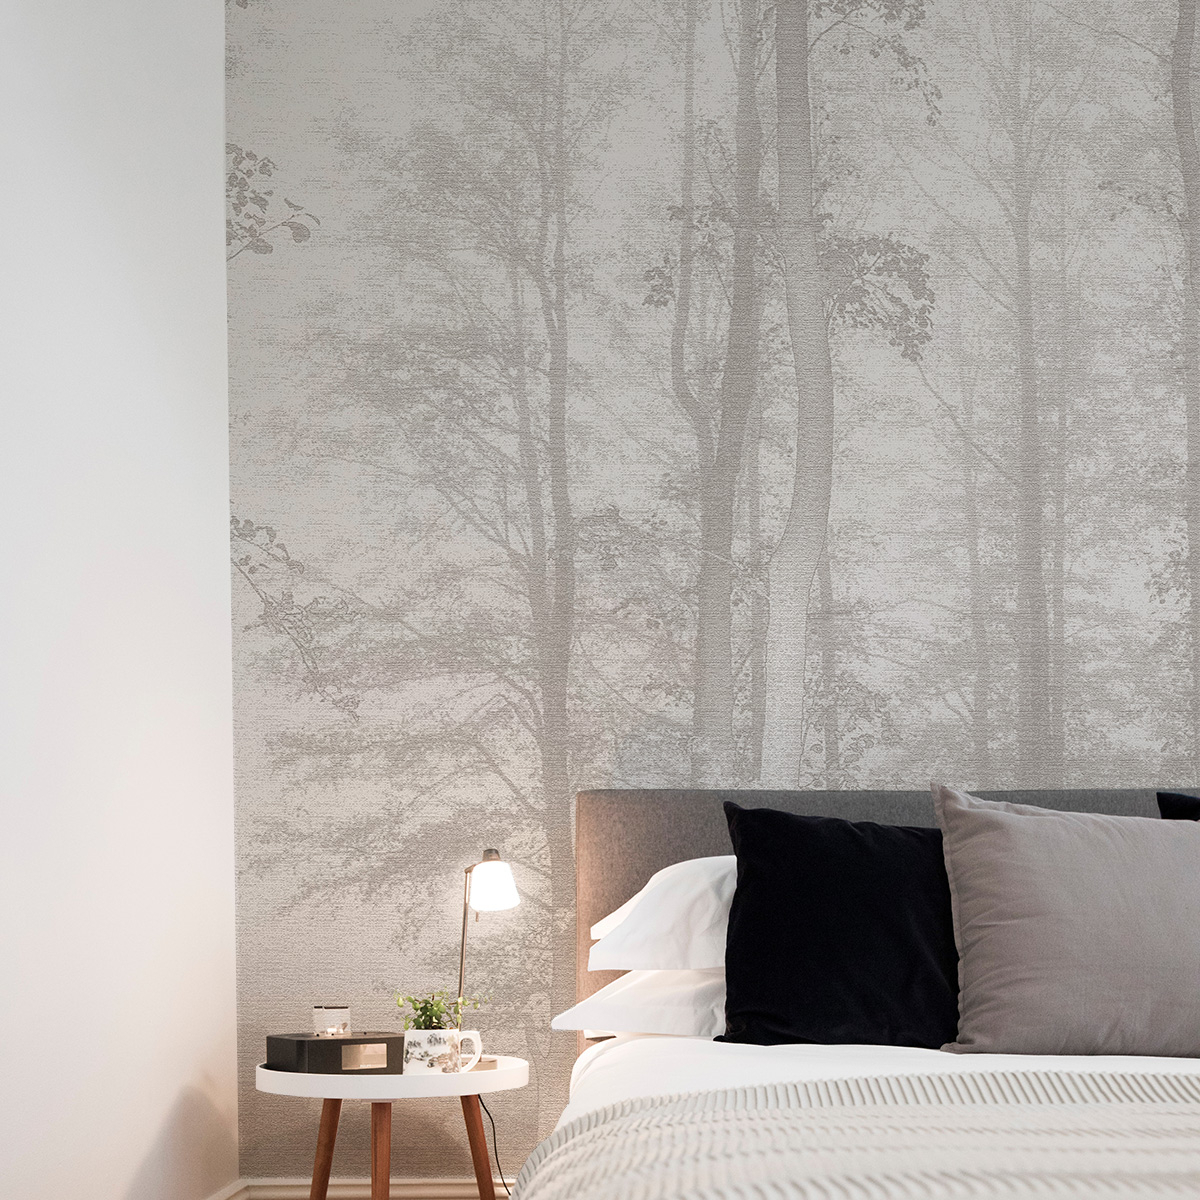 Panoramic enchanted forest wallpaper - Acte-Deco